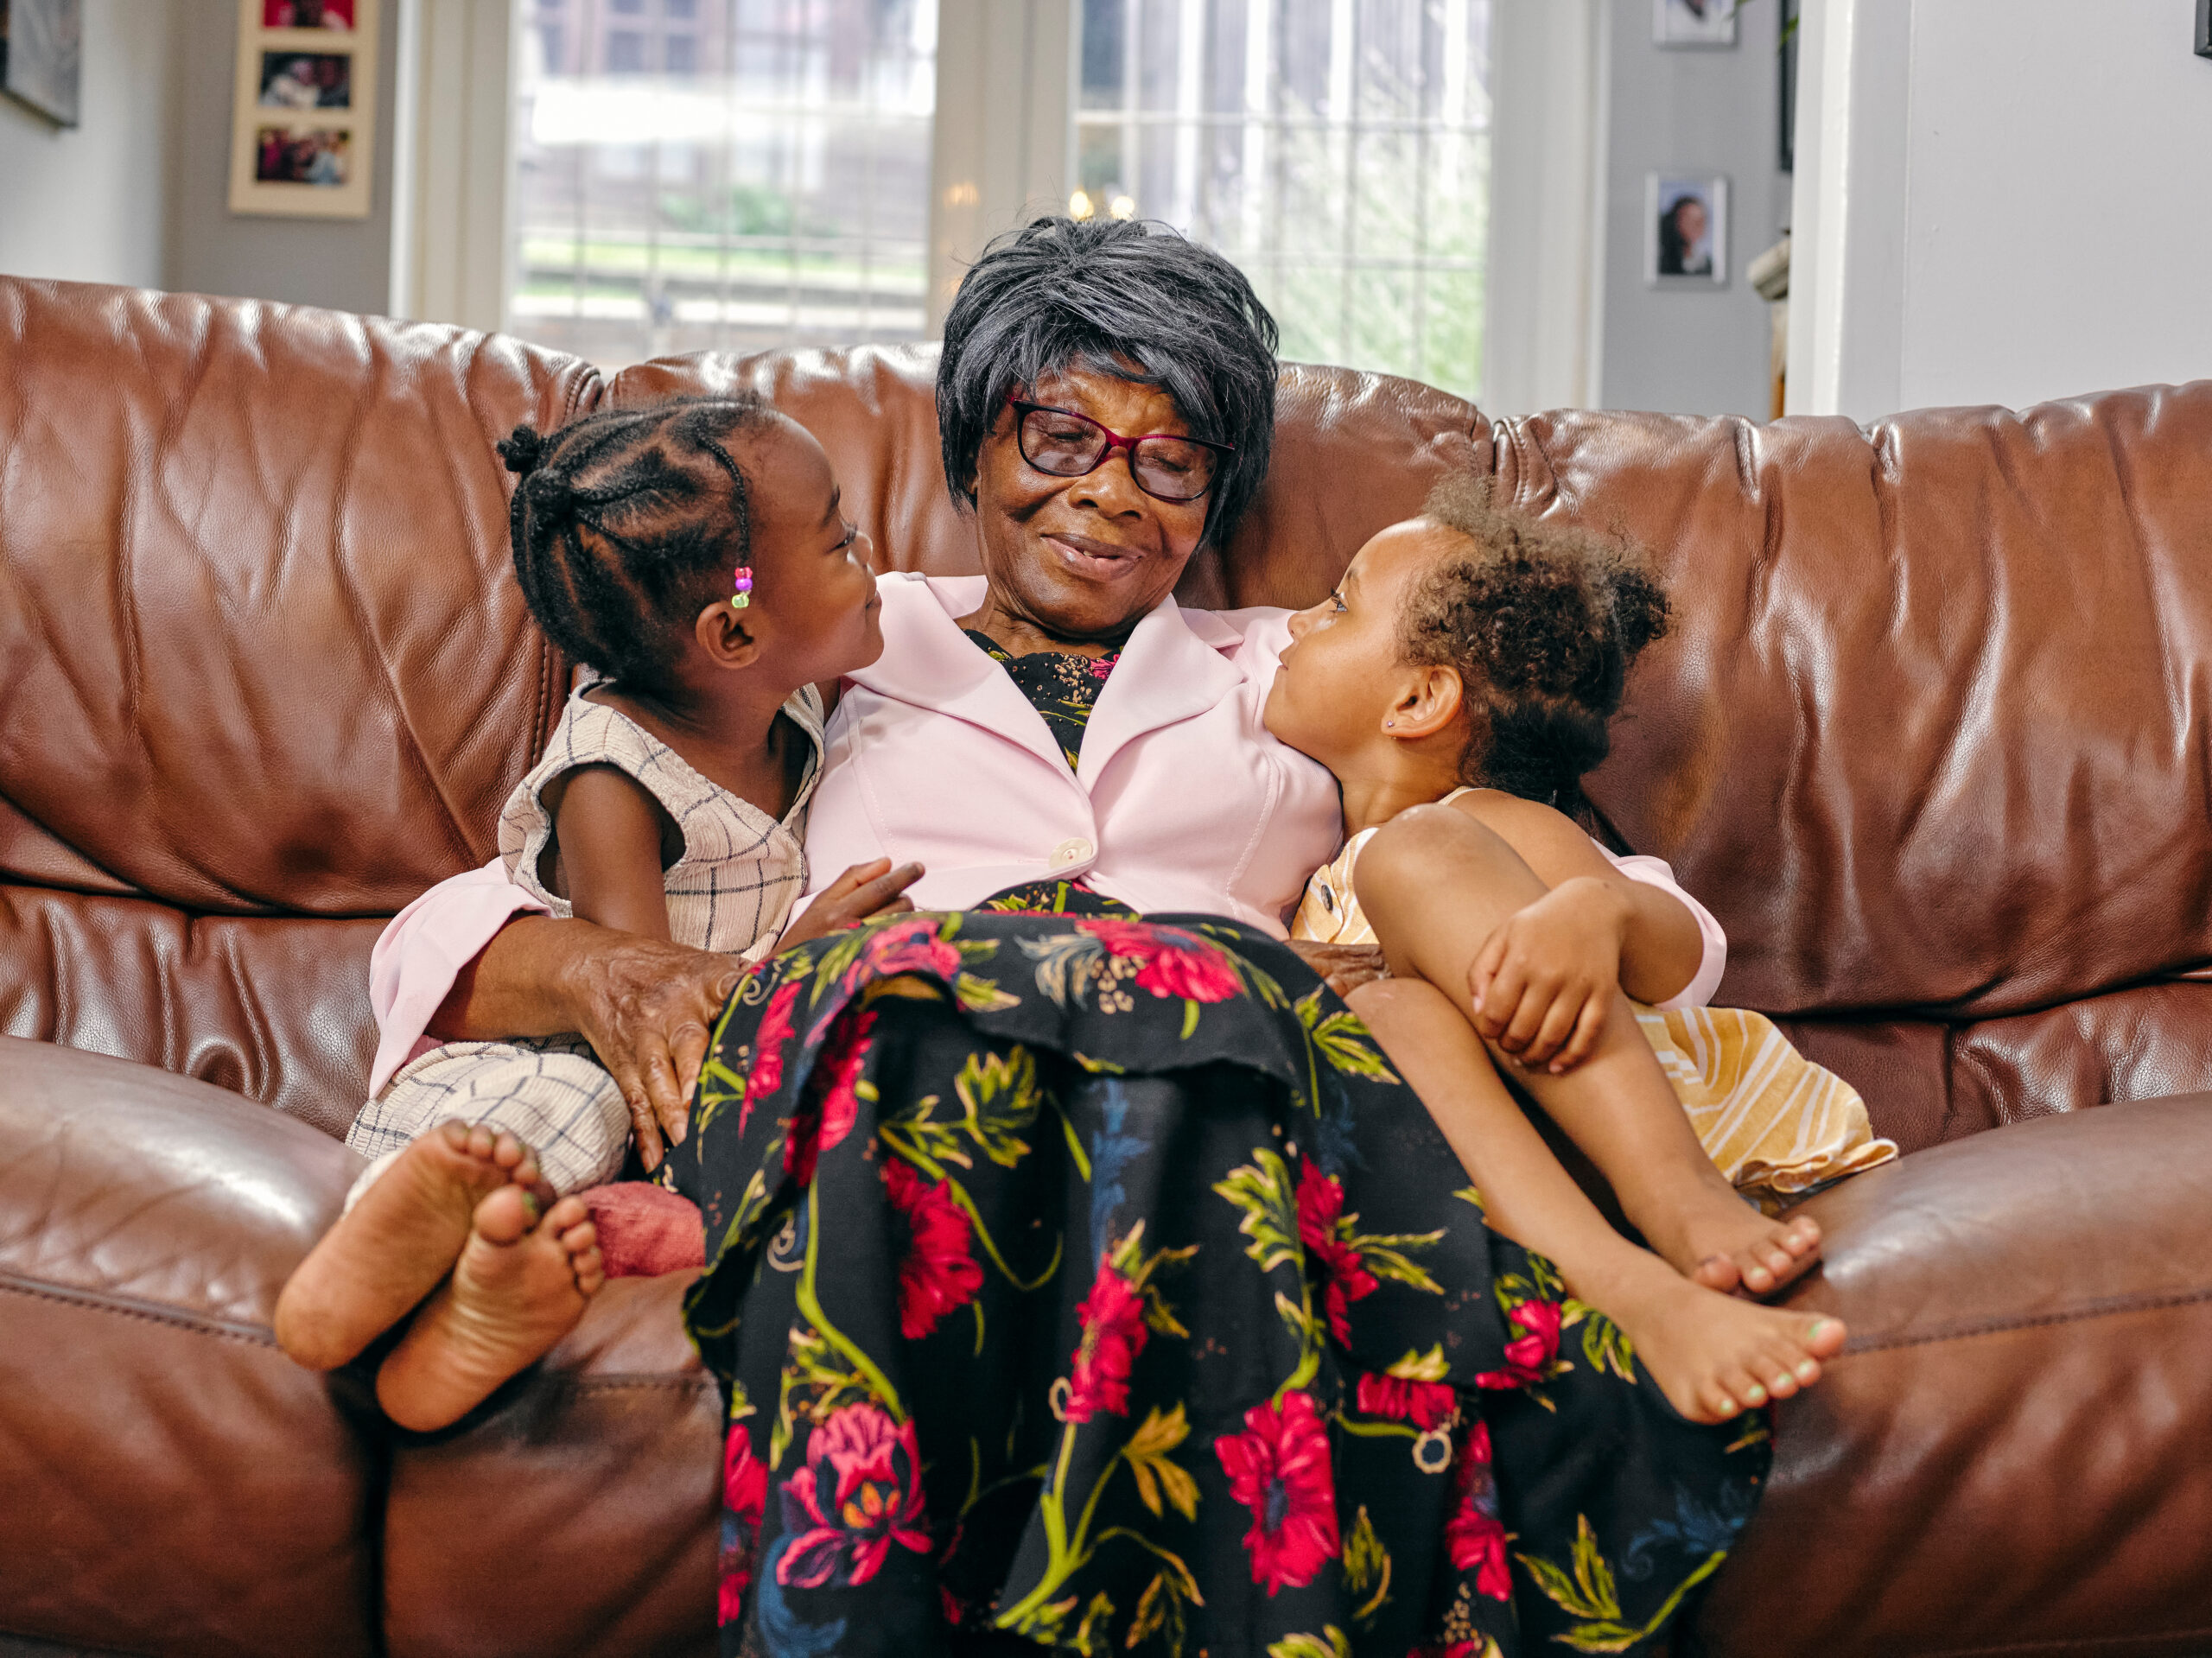 Centenarian Great grandmother sitting on sofa with great granddaughters